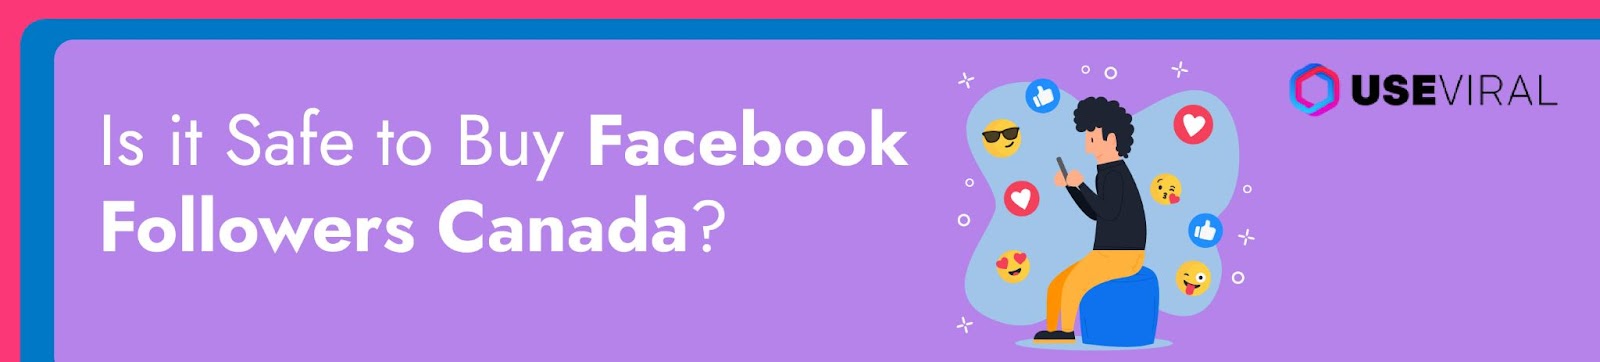 Is it Safe to Buy Facebook Followers Canada?